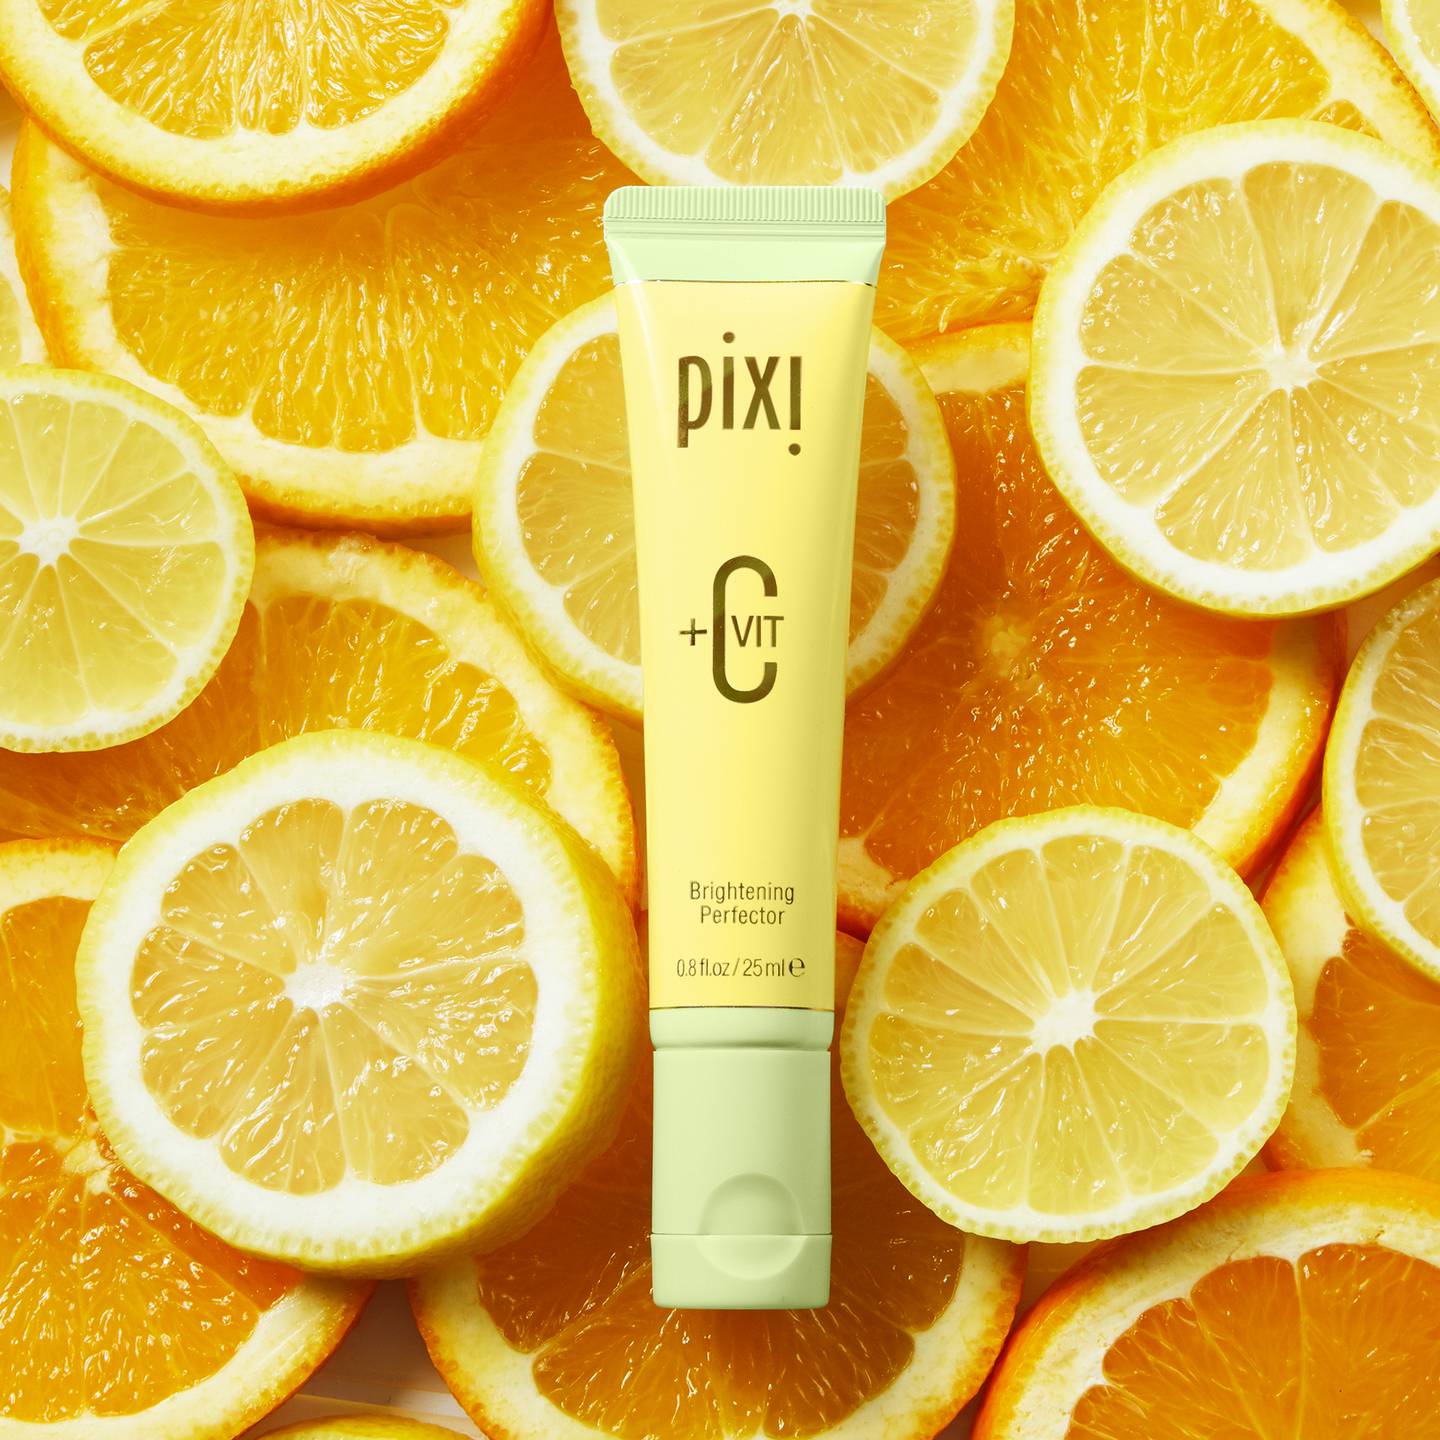 The Pixi +C Vit Brightening Perfector can replace a foundation. Photo: Pixi Beauty